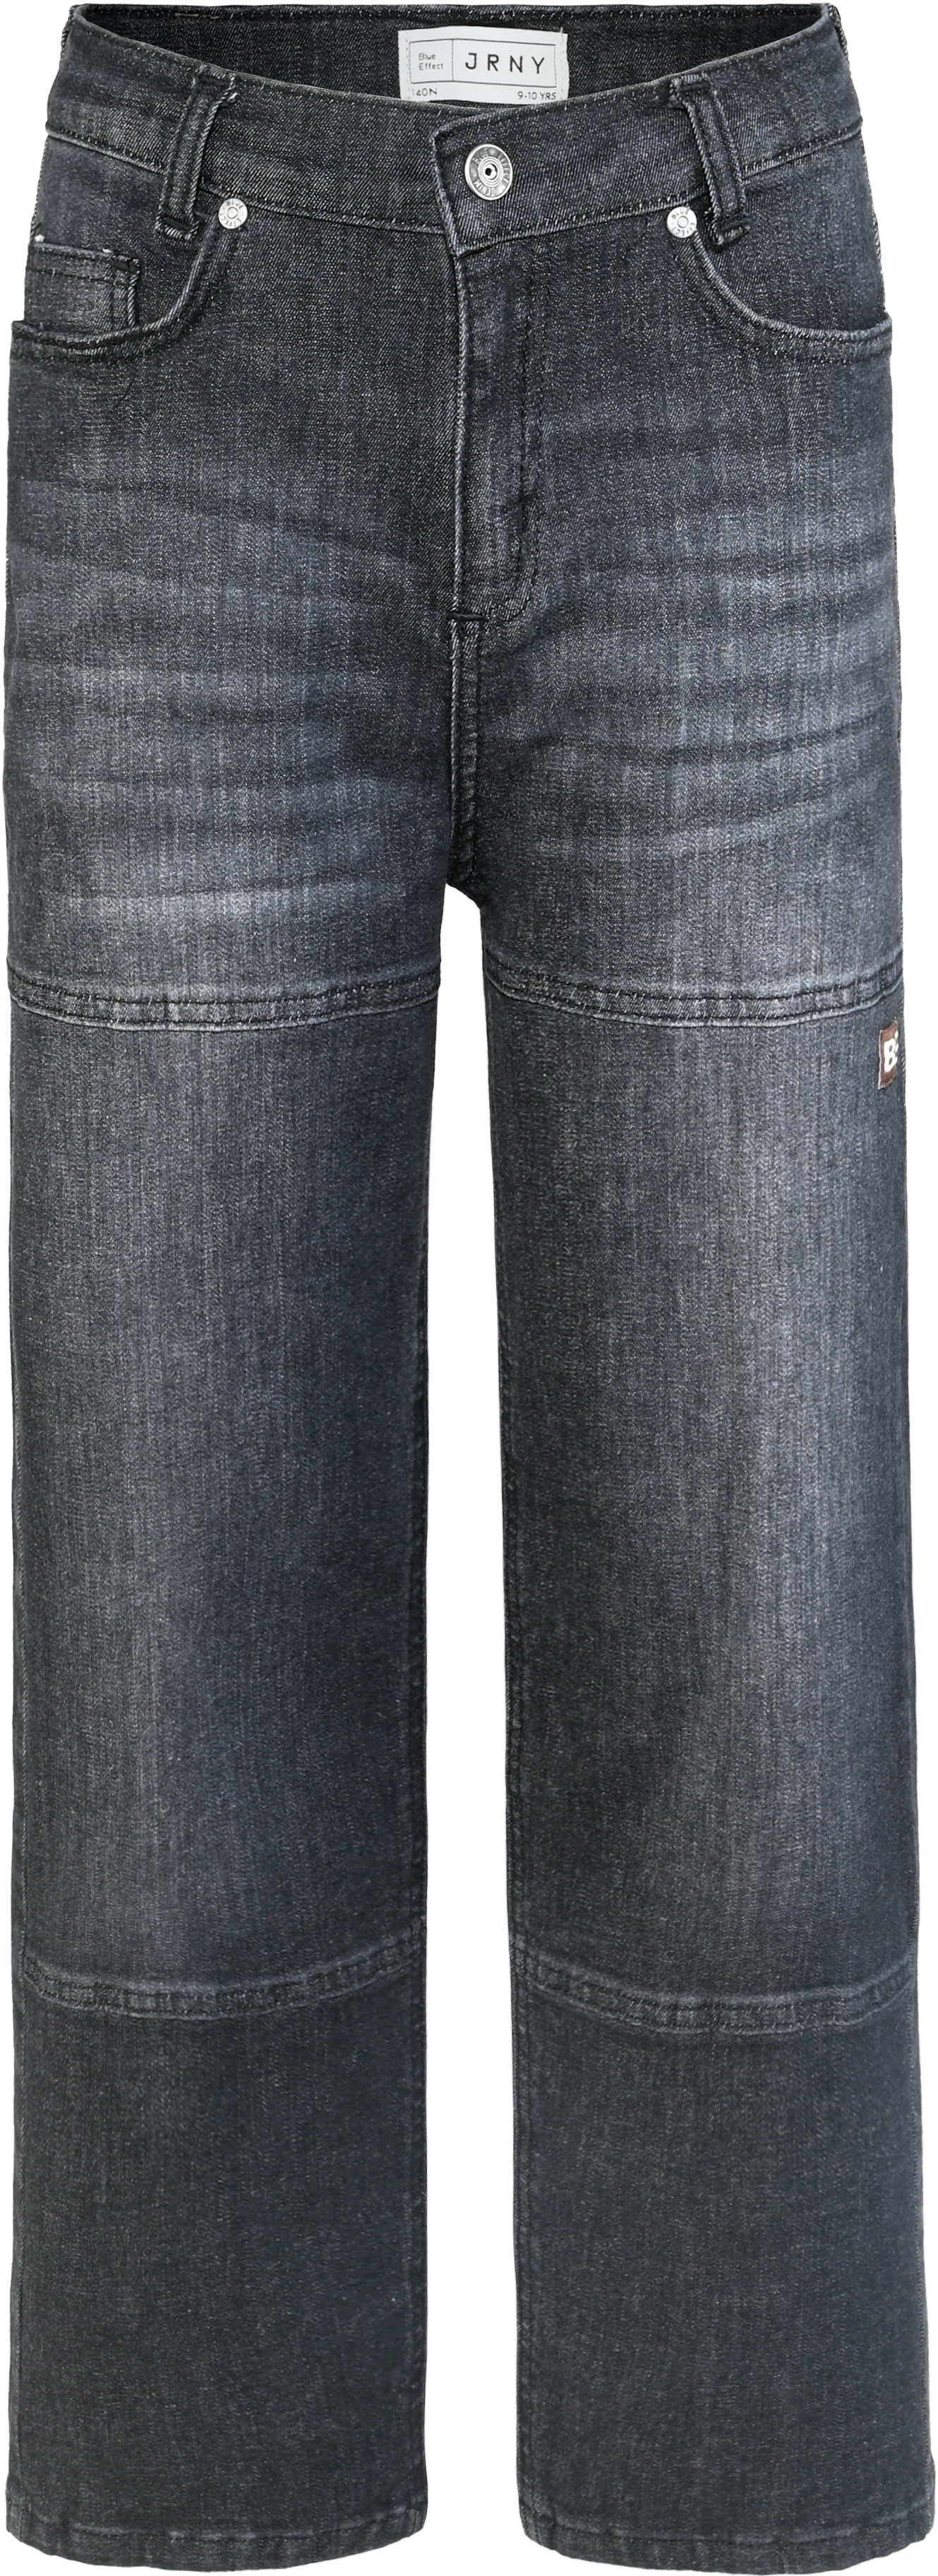 2858-Boys Super Baggy Jeans available in Normal